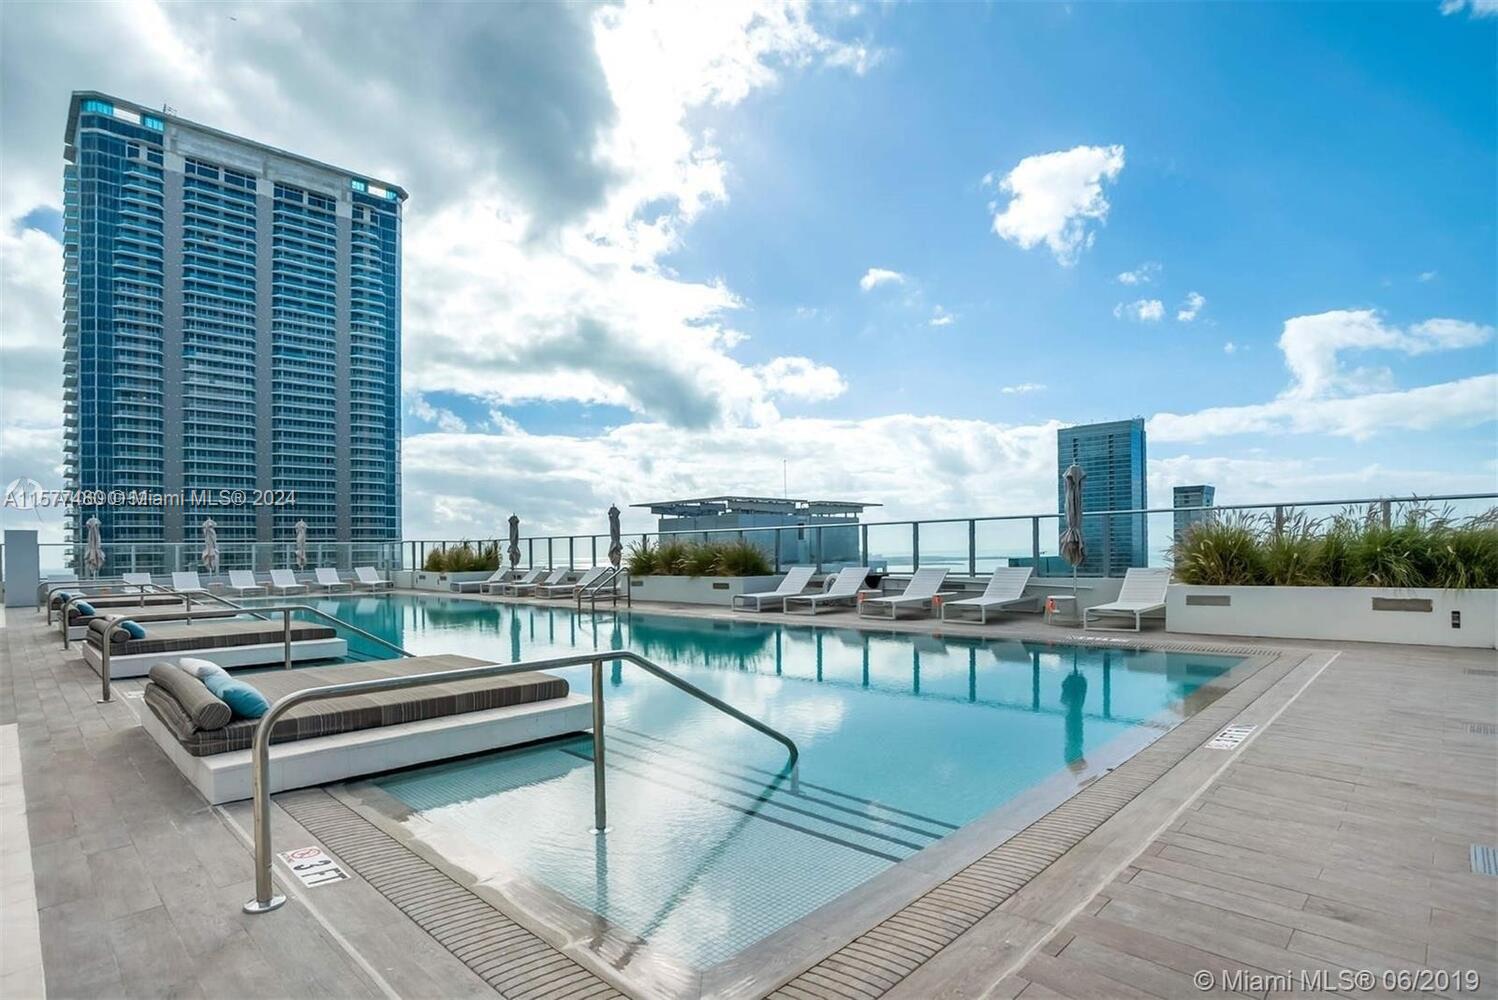 Fully Furnished 1 bedroom, 1 and a half bath, located in the most sought-after building in Brickell. 1010 Brickell amenities include movie theatre, massage & treatment rooms, steam room & sauna, basketball & racquetball courts, running track, indoor heated pool & outdoor rooftop pool. Located in the heart of Brickell steps away from all the action. For showings and video of unit please contact listing agent.